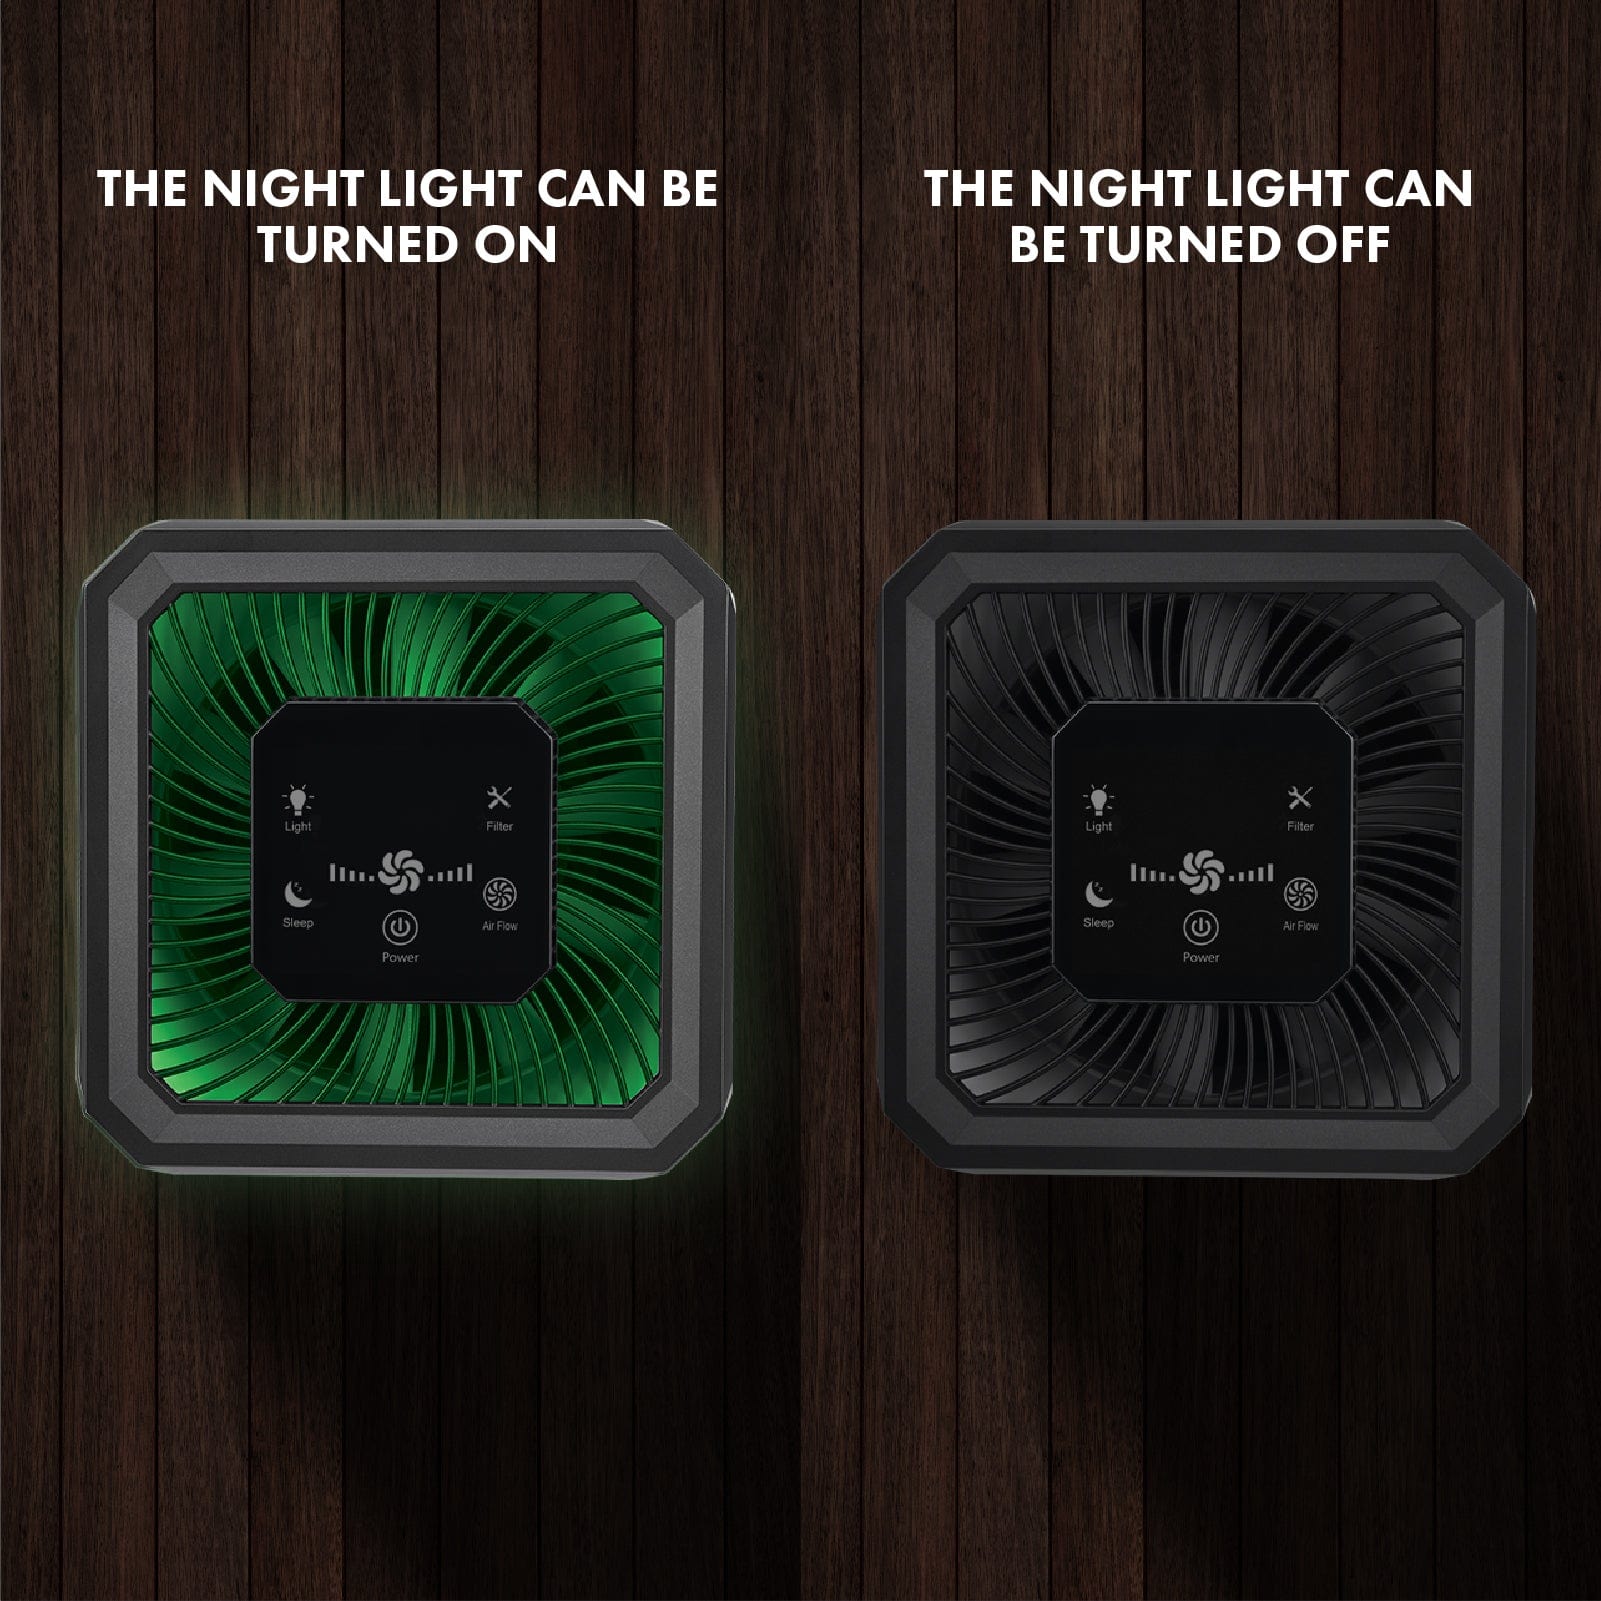 The night light can be turned on or turned off